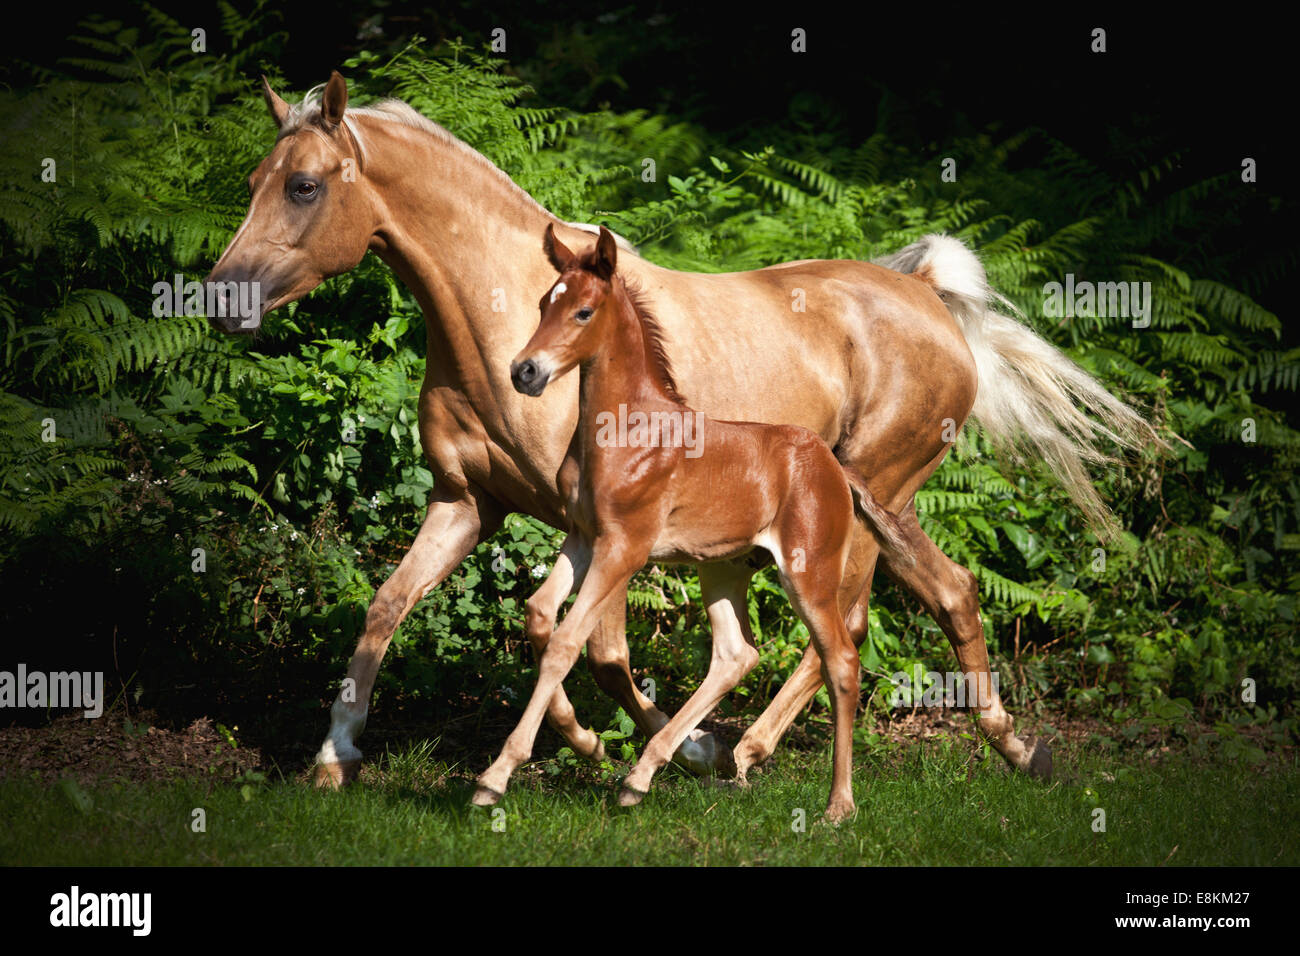 Mare with colt, 3 weeks, German small horse X P.R.E. and German small horse trotting on meadow Stock Photo